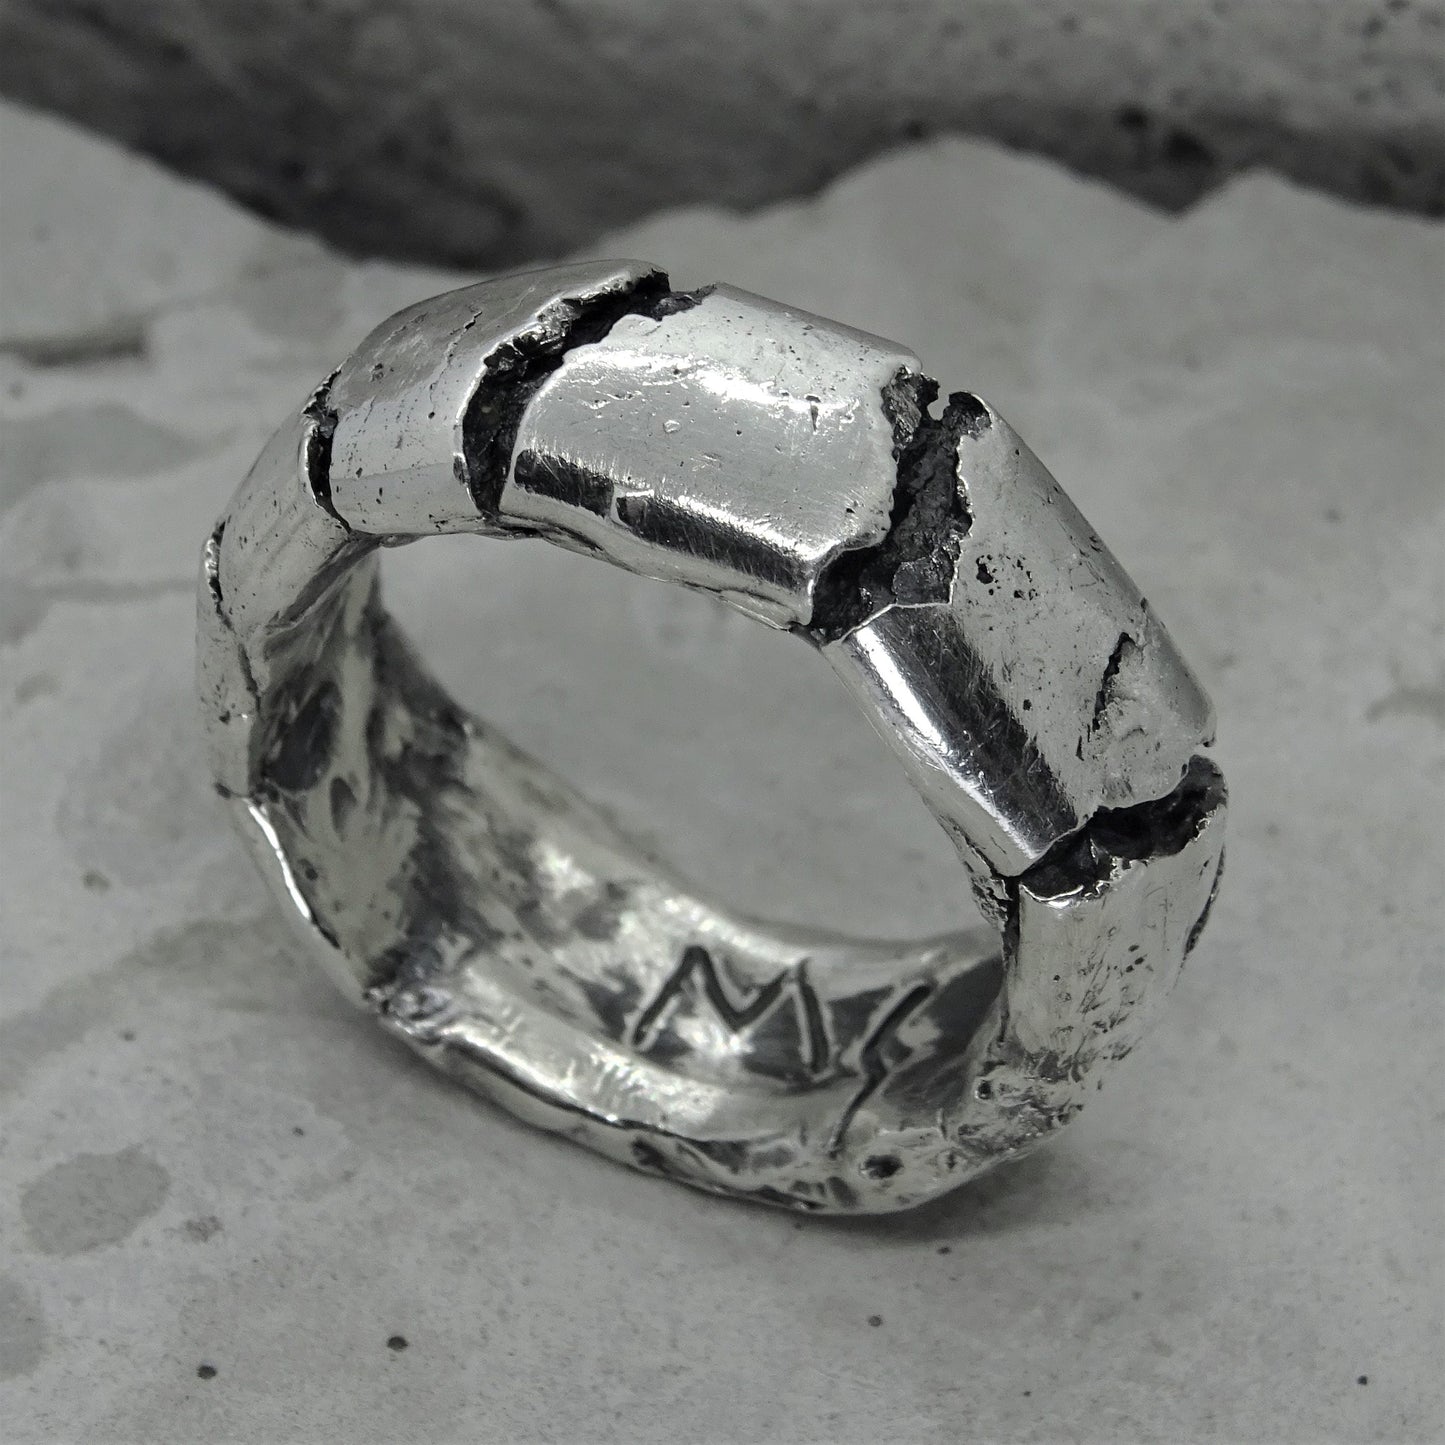 Crash ring- massive ring band with an inscription and transverse cracks Band rings Project50g 